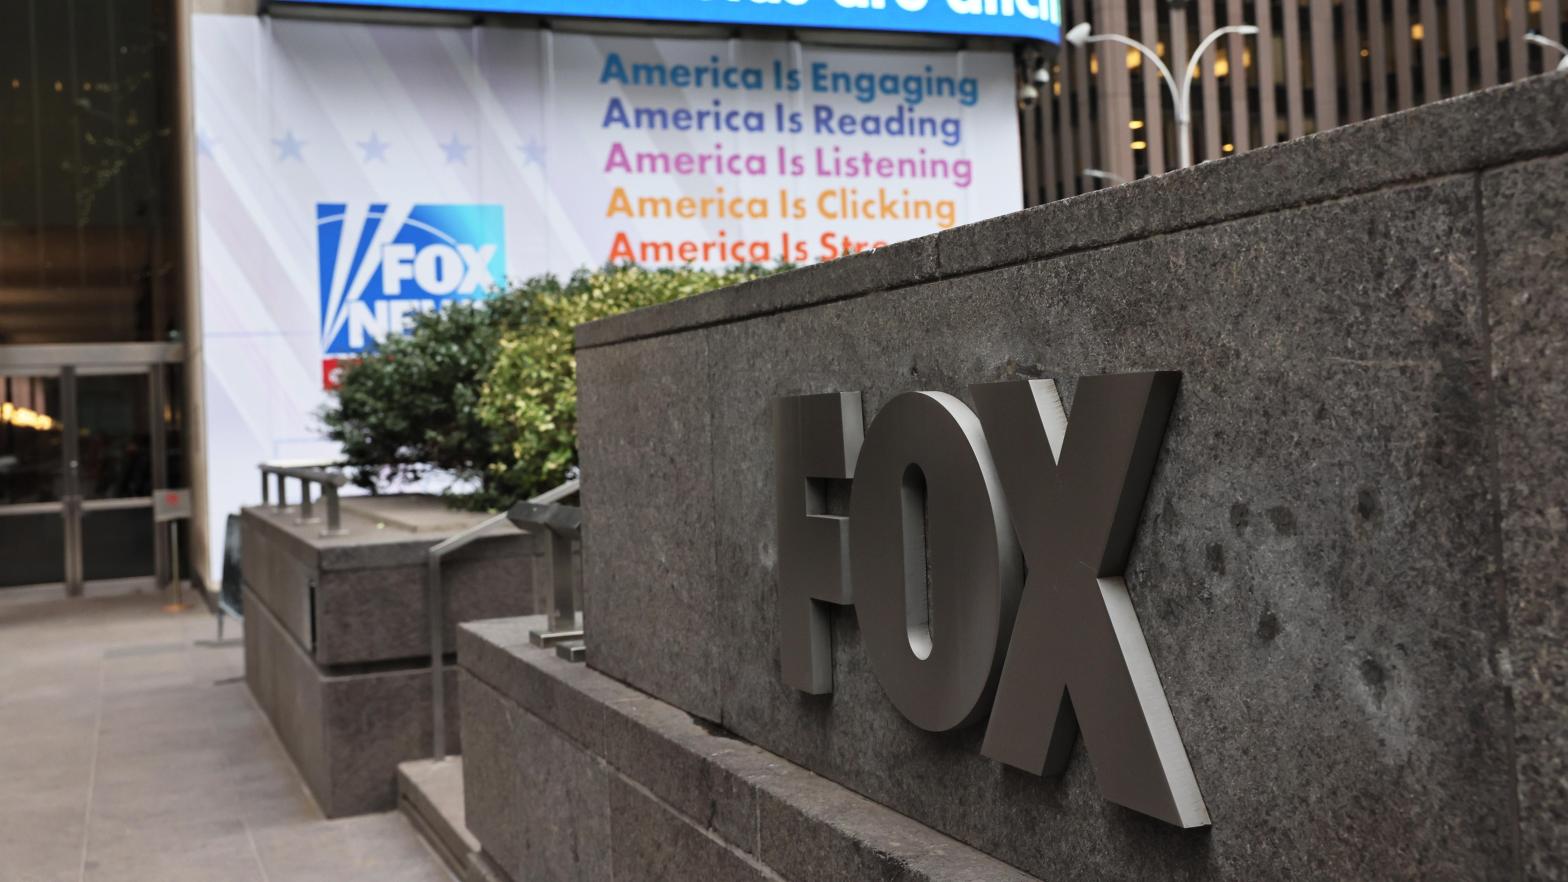 Fox News is currently in a heated defamation lawsuit with Dominion Voting Systems over allegations it helped spread the election denier conspiracy. (Photo: Michael M. Santiago, Getty Images)